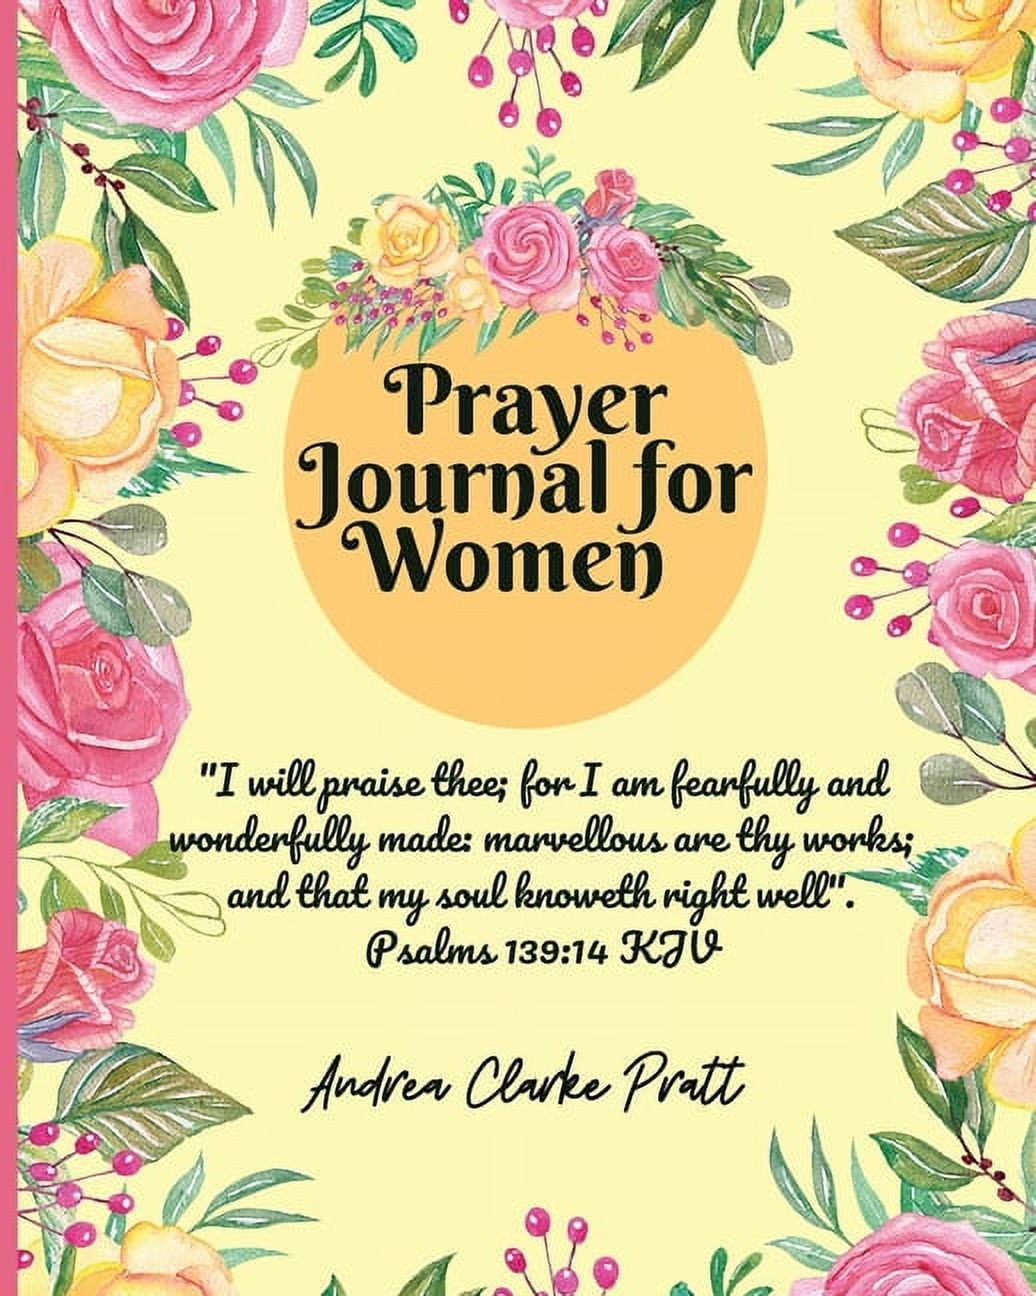 Prayer Journal Proverbs 31 Woman Gifts - Great Christian Gifts For Women  Under 10 Dollars - Bible Journaling Supplies: Our Bible Verse Spiritual   - Christian Woman Christmas, Easter Gift in Saudi Arabia